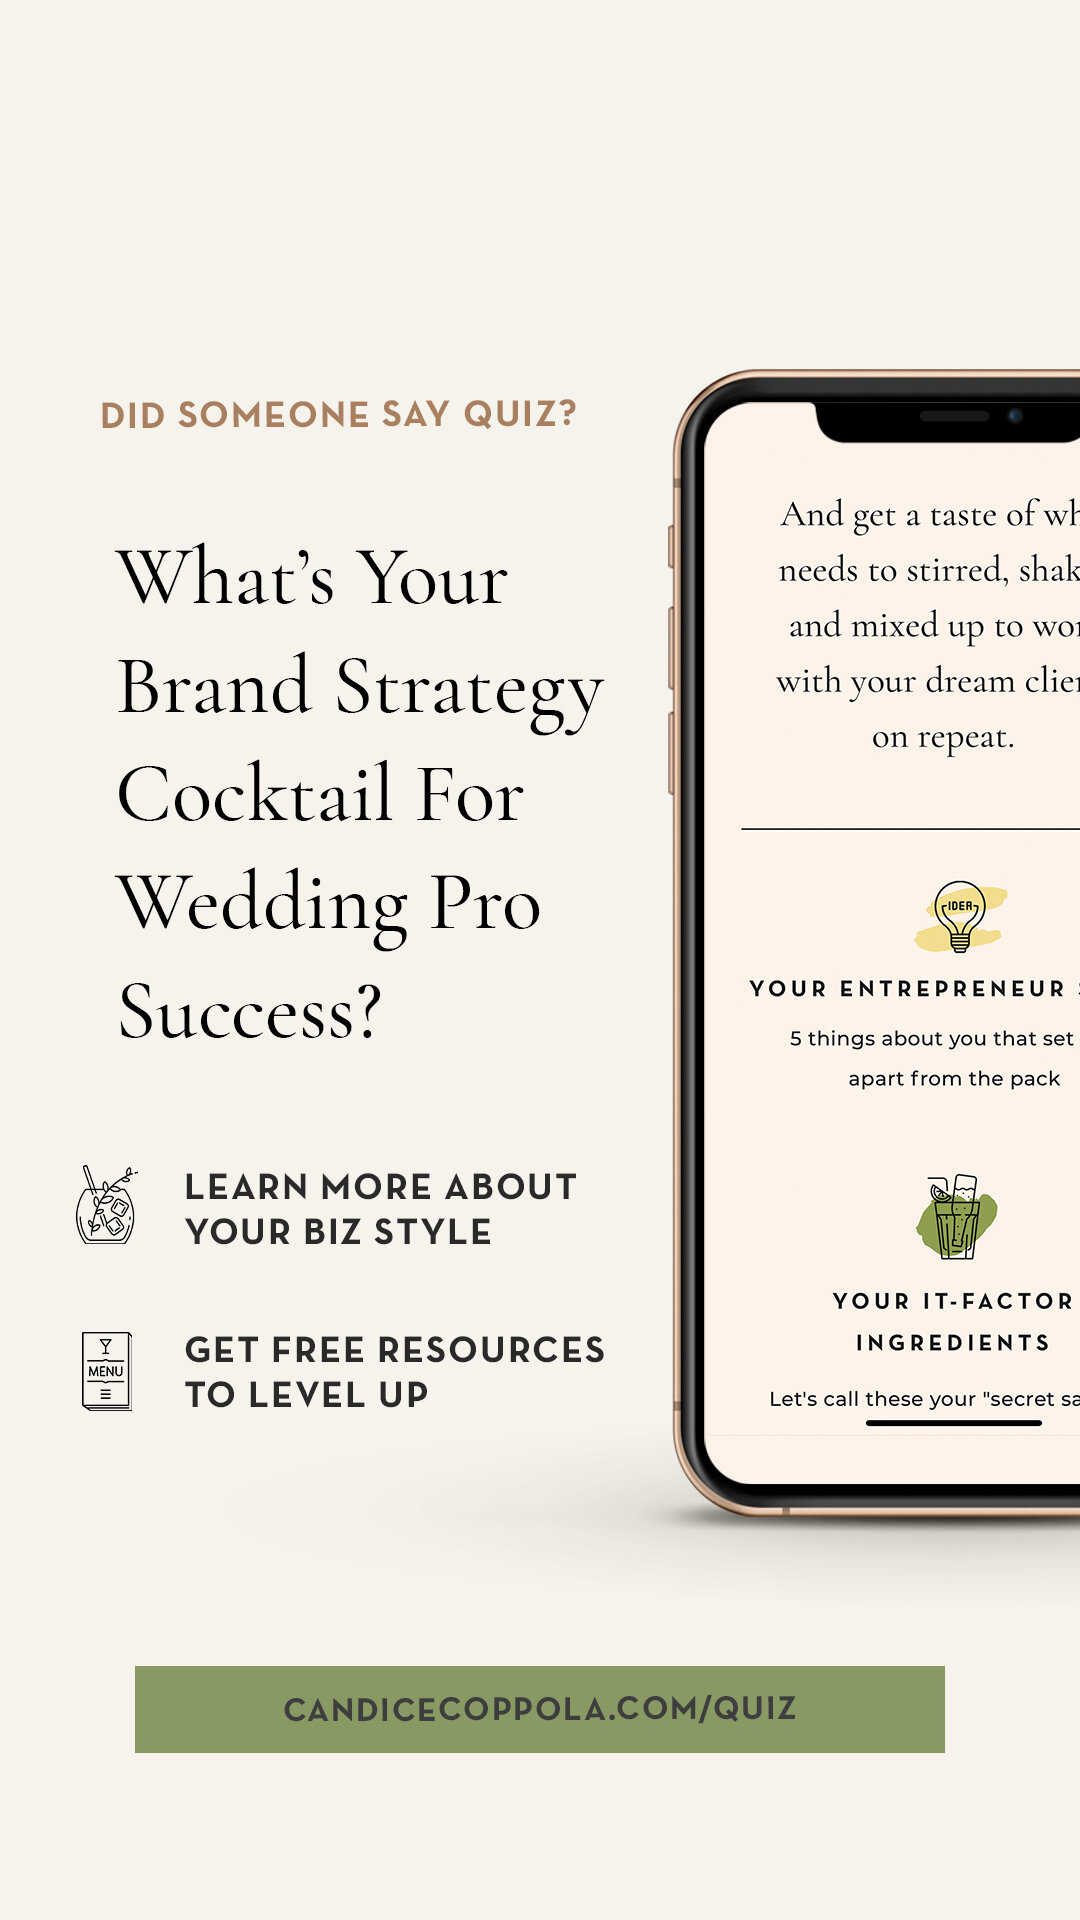 What’s Your Brand Strategy Cocktail For Wedding Pro Success? Raise your glass and toast to what makes you one-of-a-kind in the wedding industry… And get a taste of what needs to stirred, shaken and mixed up to work with your dream clients on repeat!